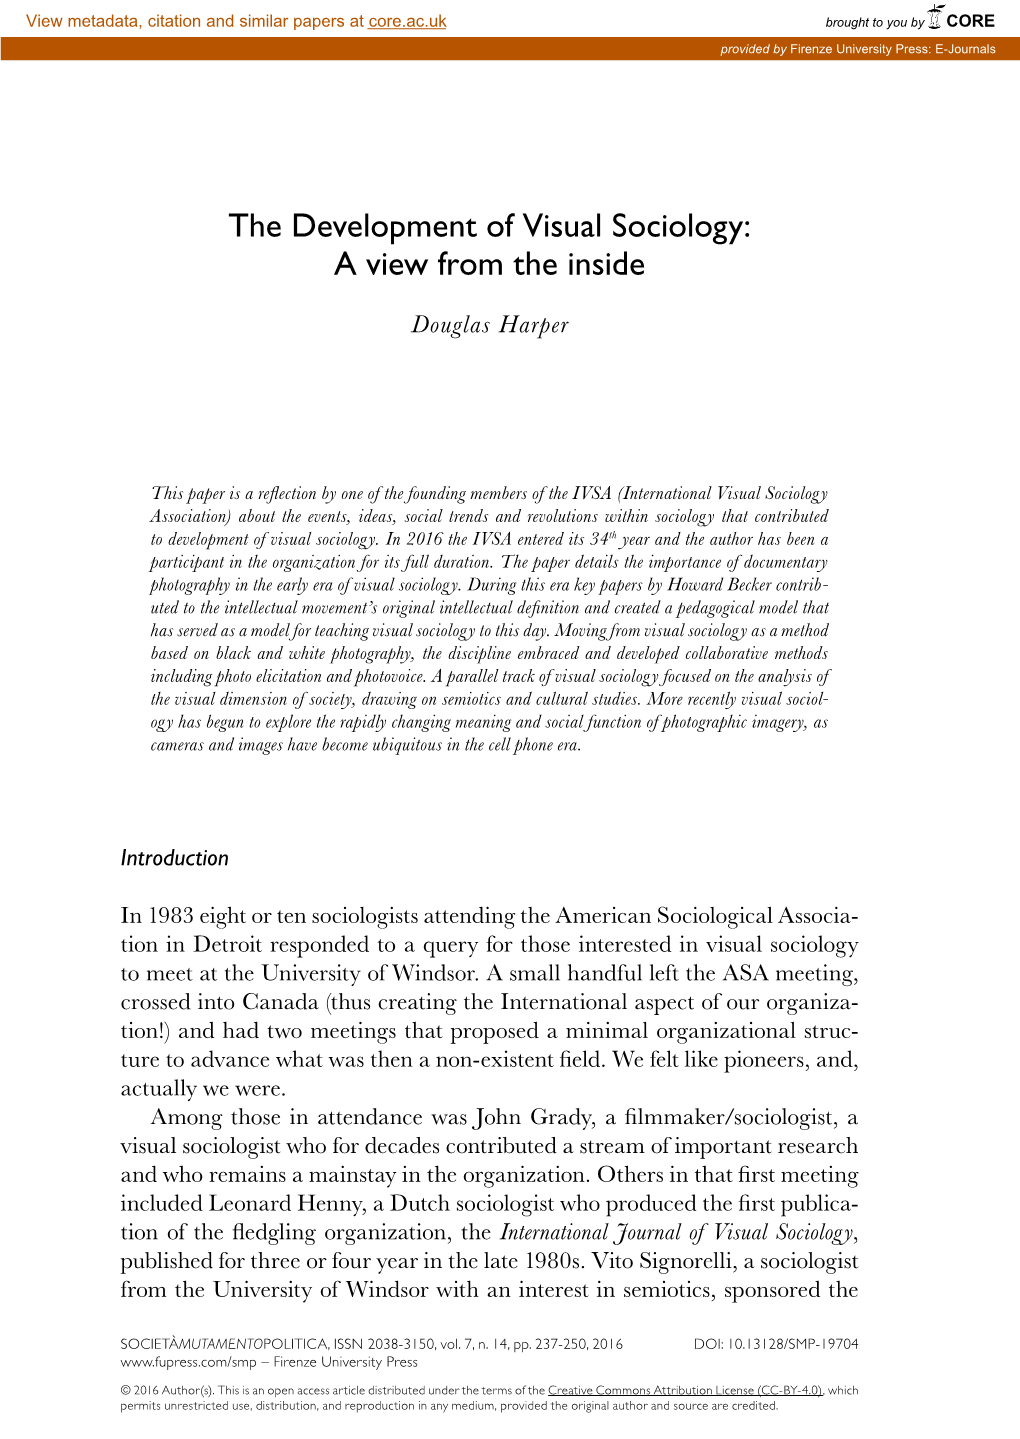 The Development of Visual Sociology: a View from the Inside